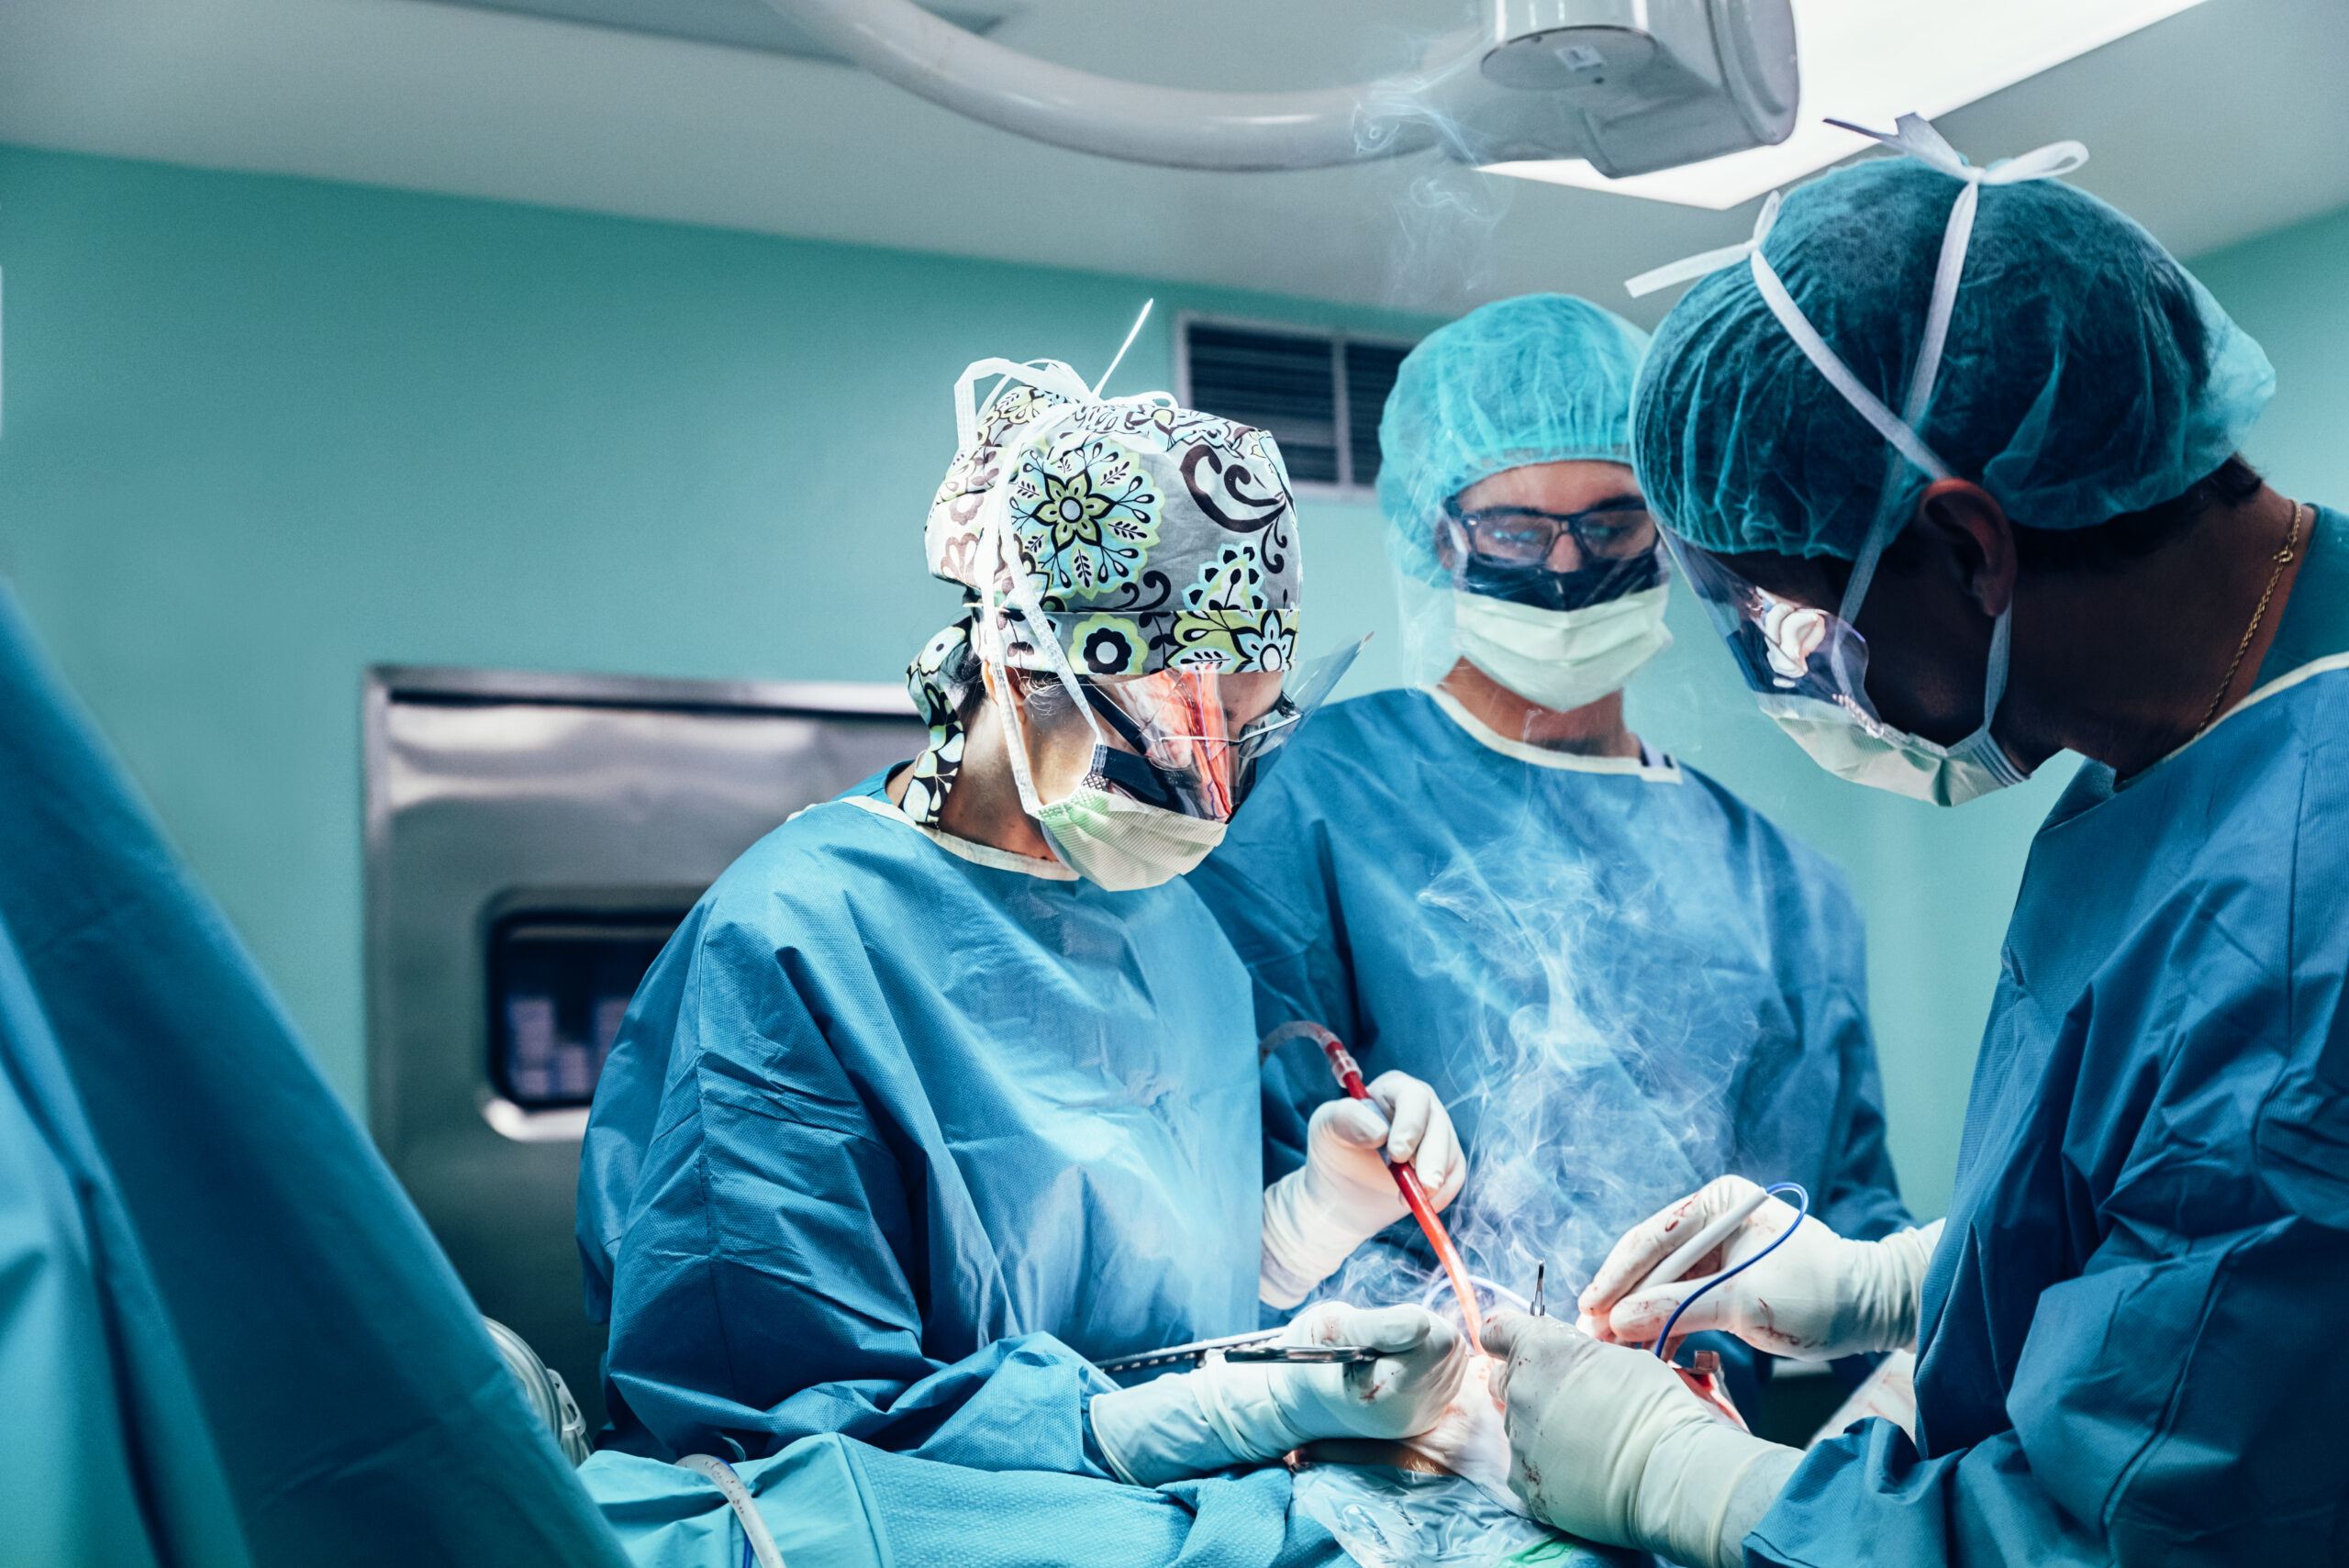 A group of dedicated surgeons in an operating room.